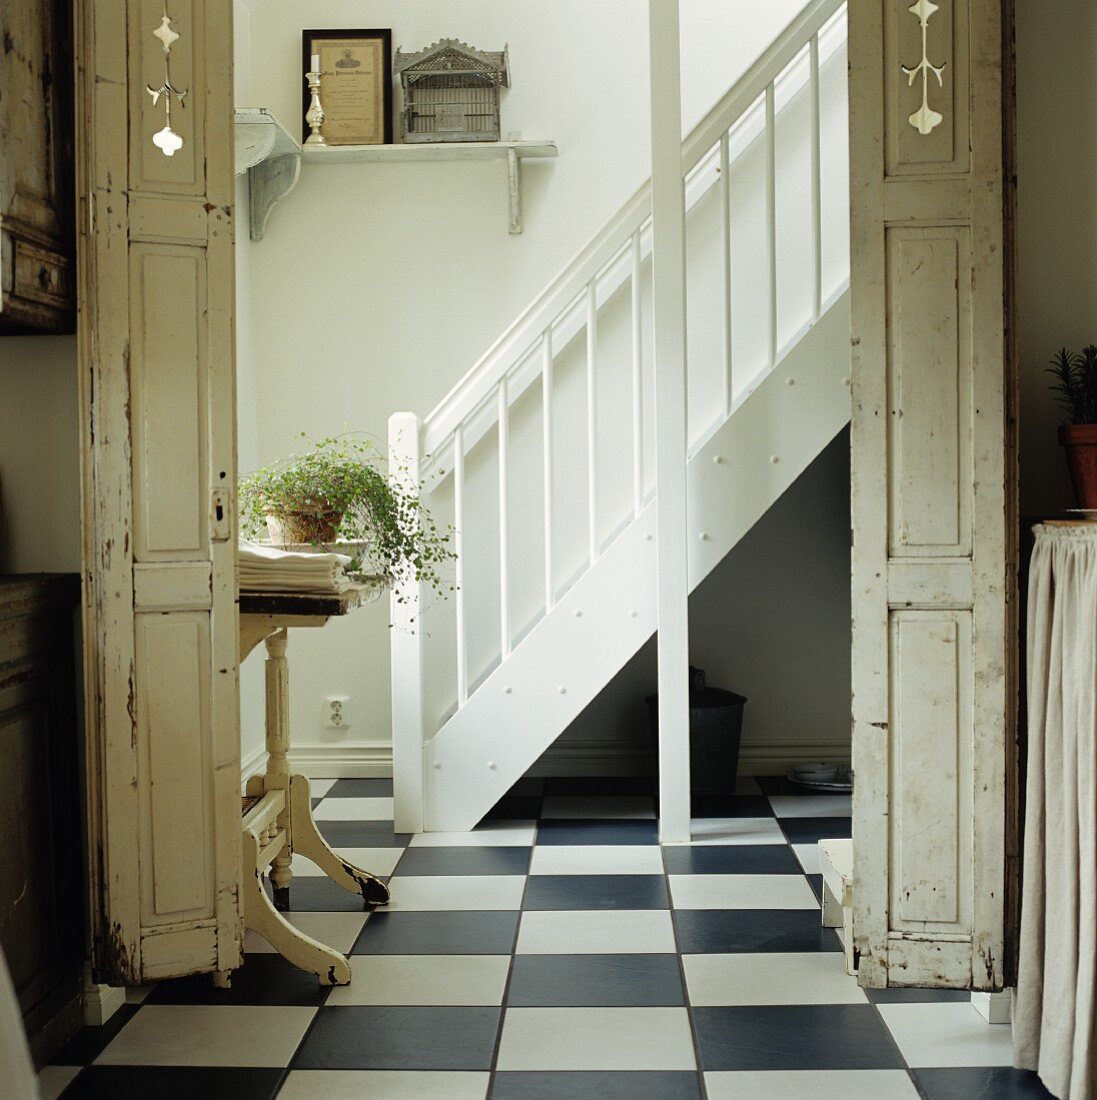 Snow-white, country-house staircase, traditional, chequered tiled floor and folding doors with peeling paint